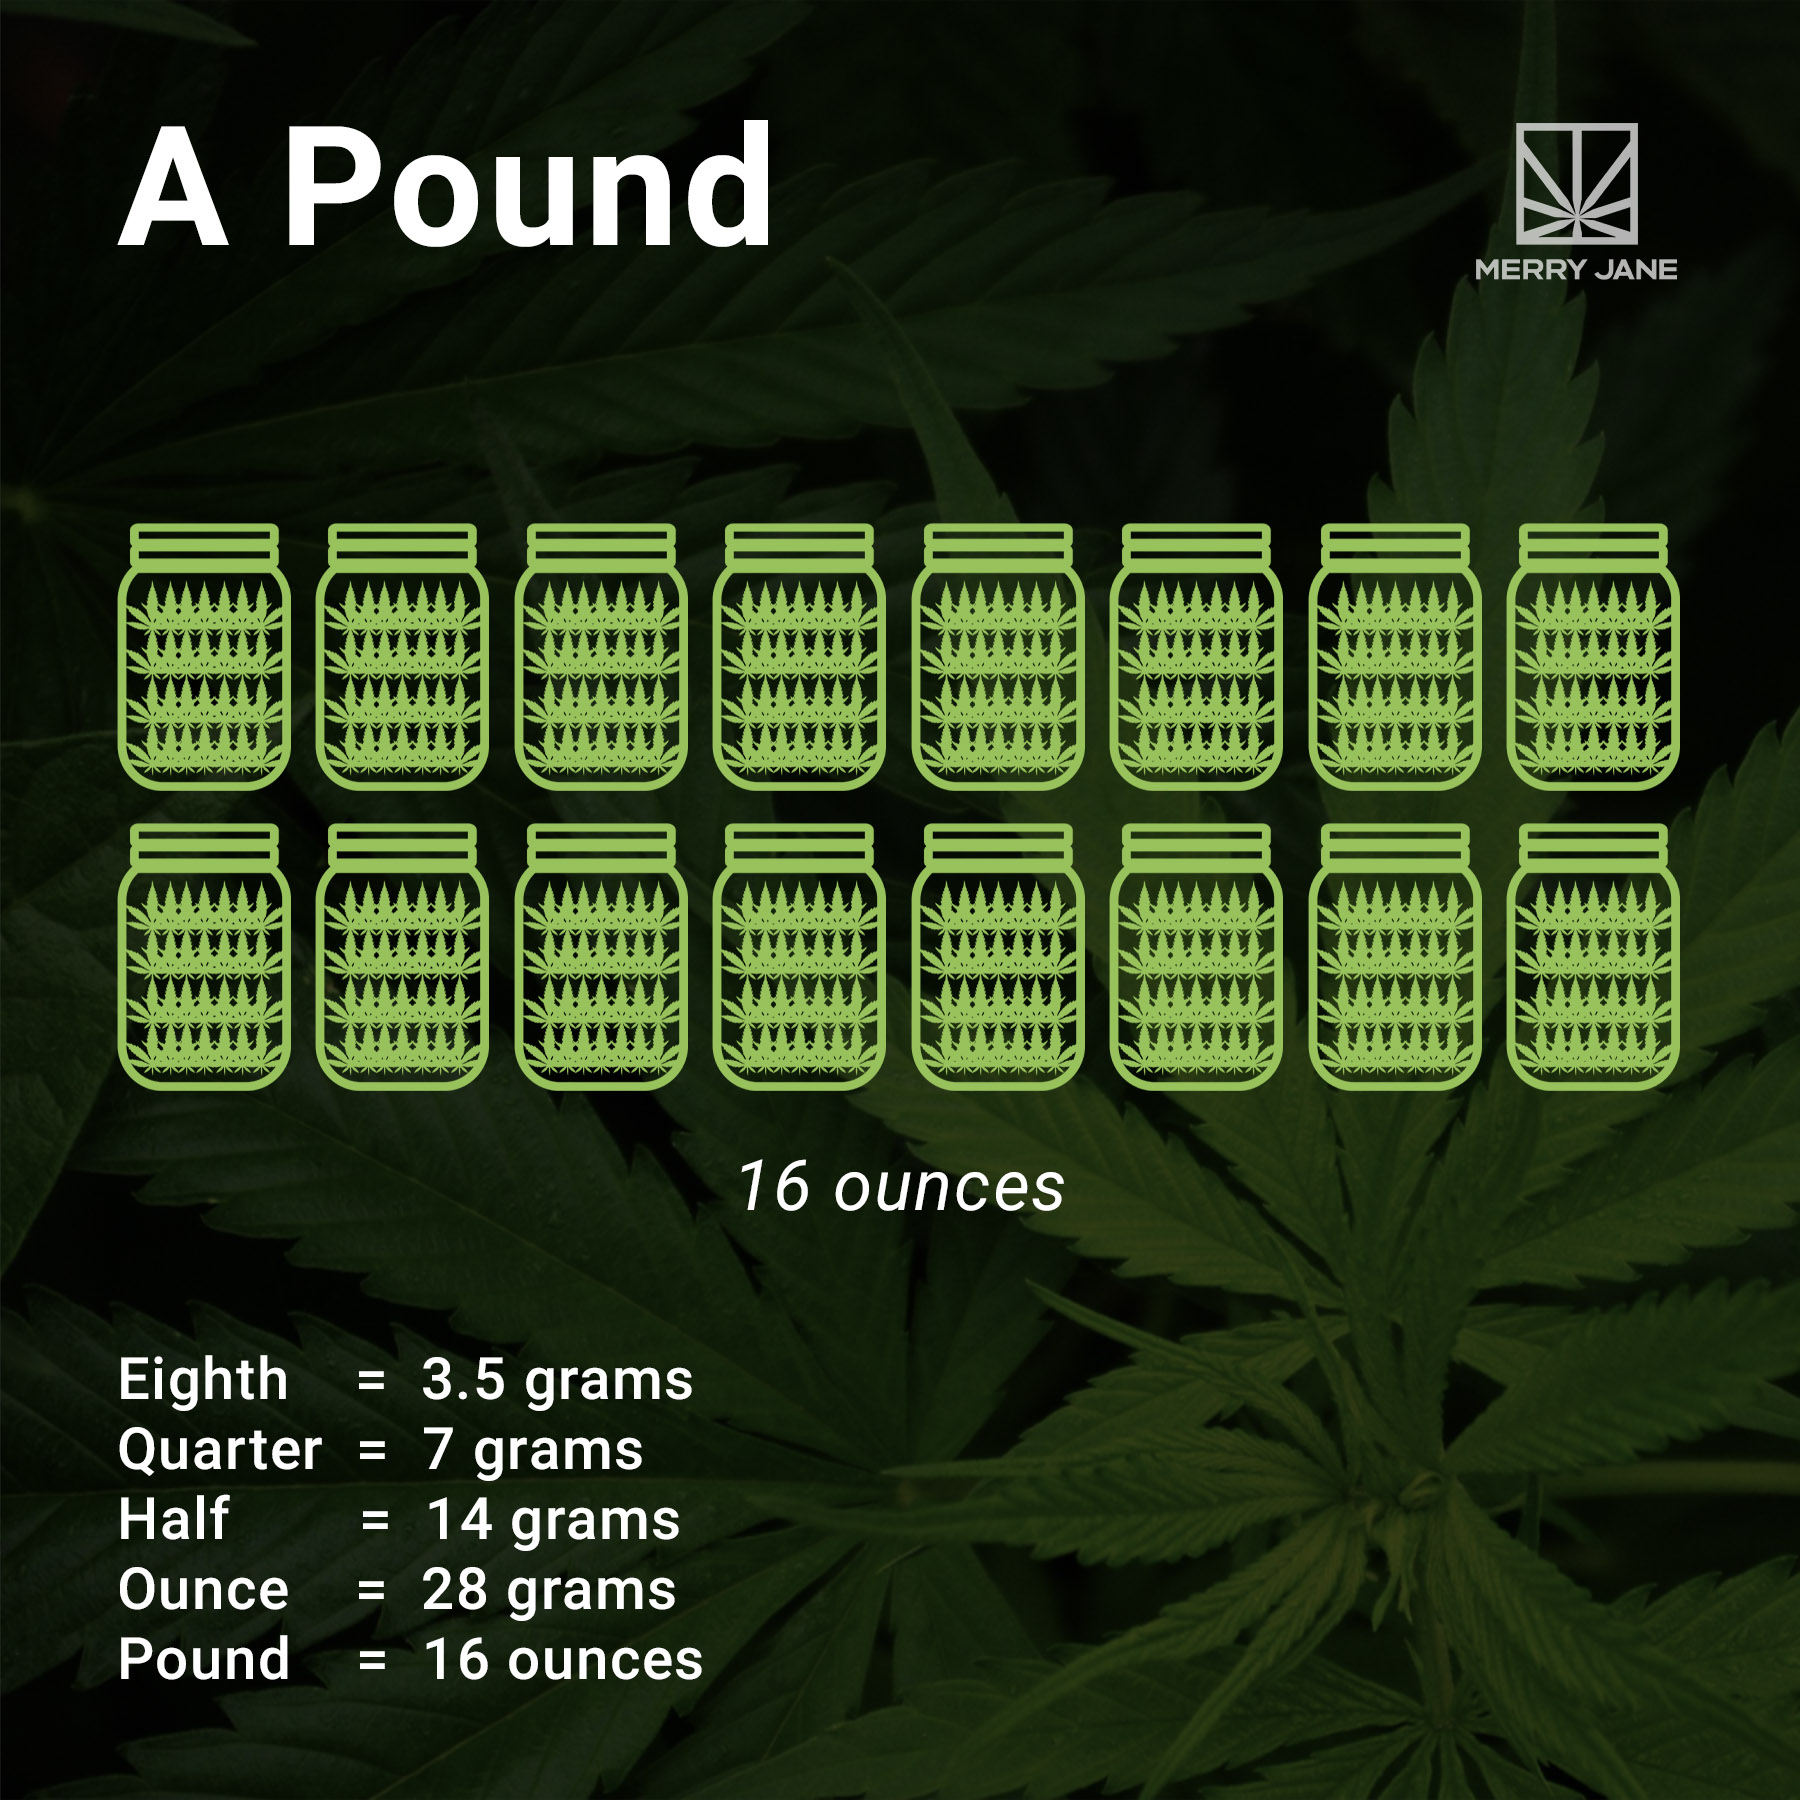 Ounce Of Weed: How Many Grams Is An Ounce Of Cannabis